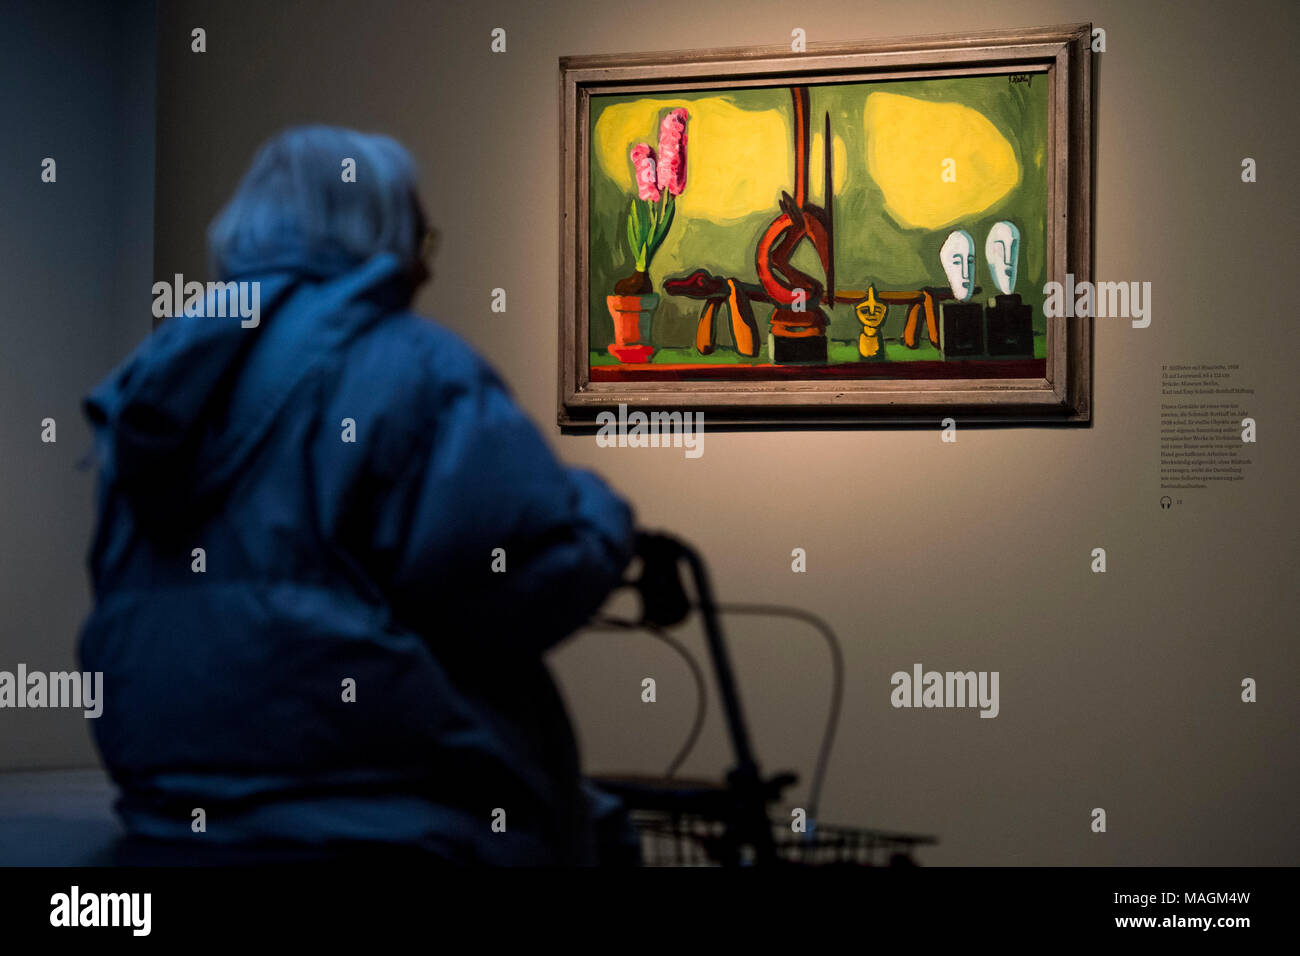 ILLUSTRATION - 16 March 2018, Germany, Hamburg: An elderly woman with rollator looks at the paintings 'Stillleben mit Hyazinthe' (lit. still life with hyacinth) (1938) by Karl Schmidt-Rottluff at the Bucerius Arts Forum in Hamburg. The Hamburg museum Bucerius Arts Forum offers guided exhibition tours particularly for dementia patients. Photo: Malte Christians/dpa Stock Photo